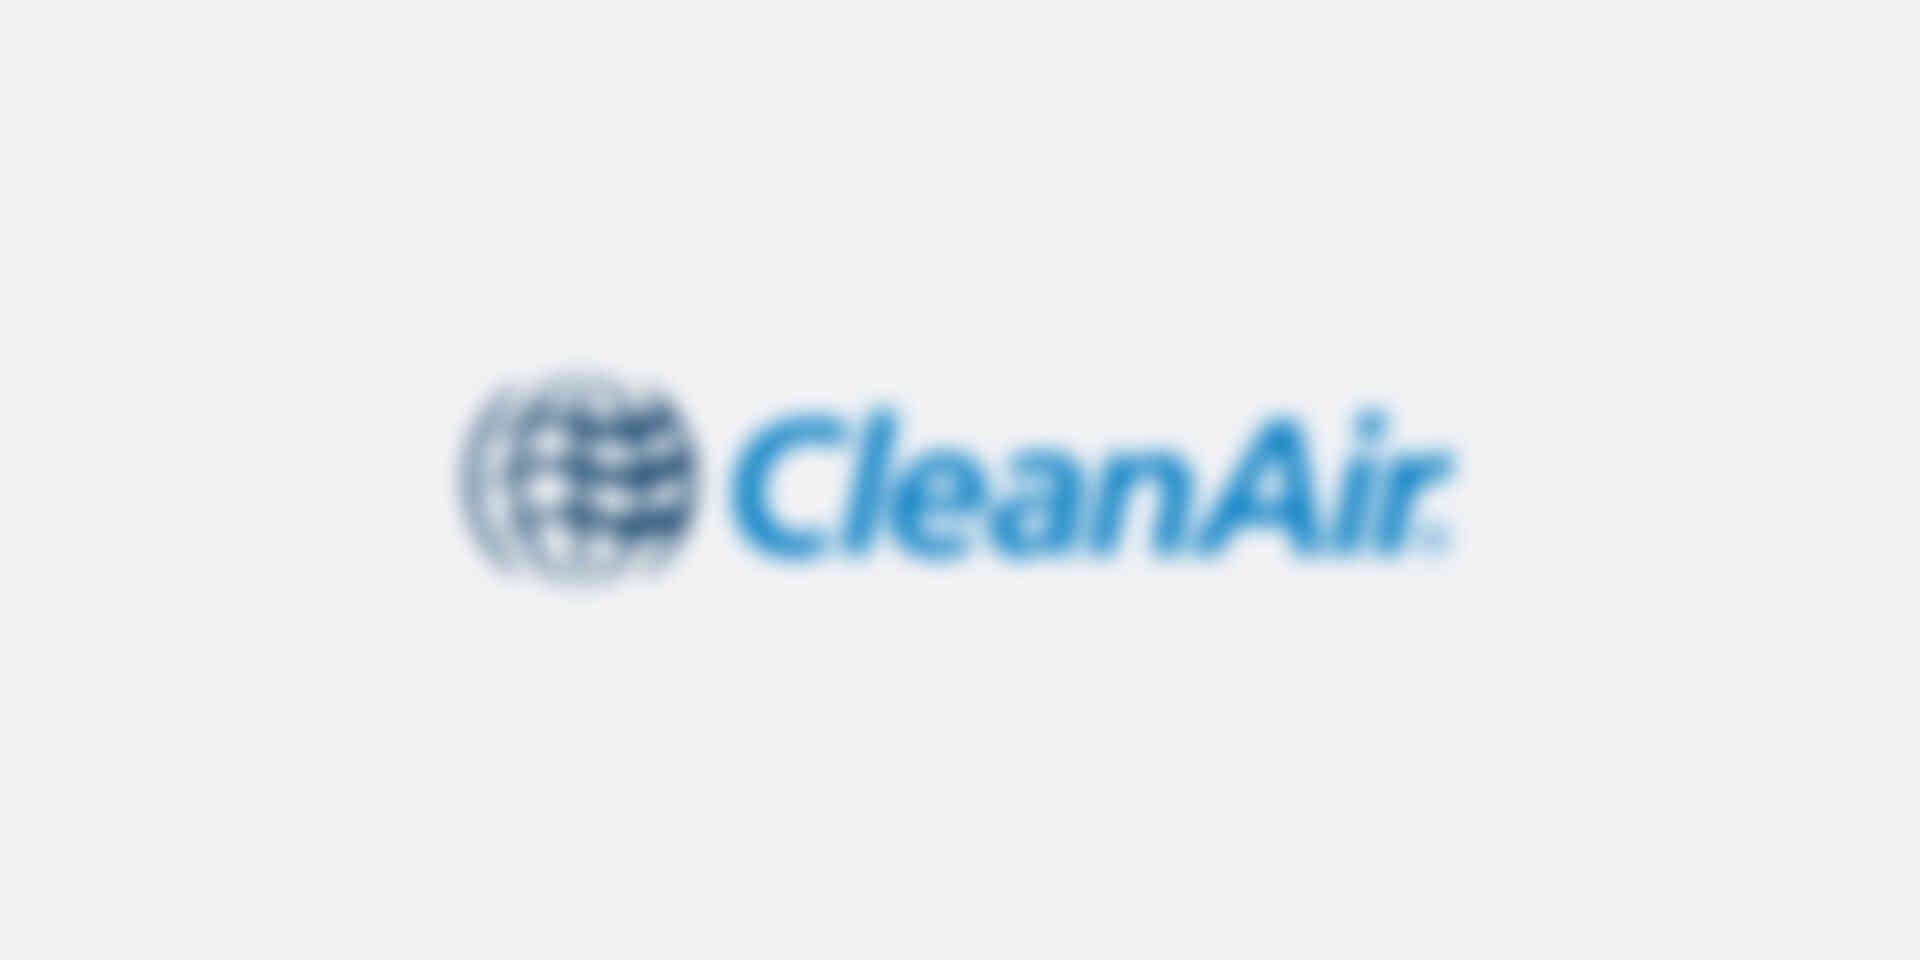 Our clients - engineering-construction-cleanair